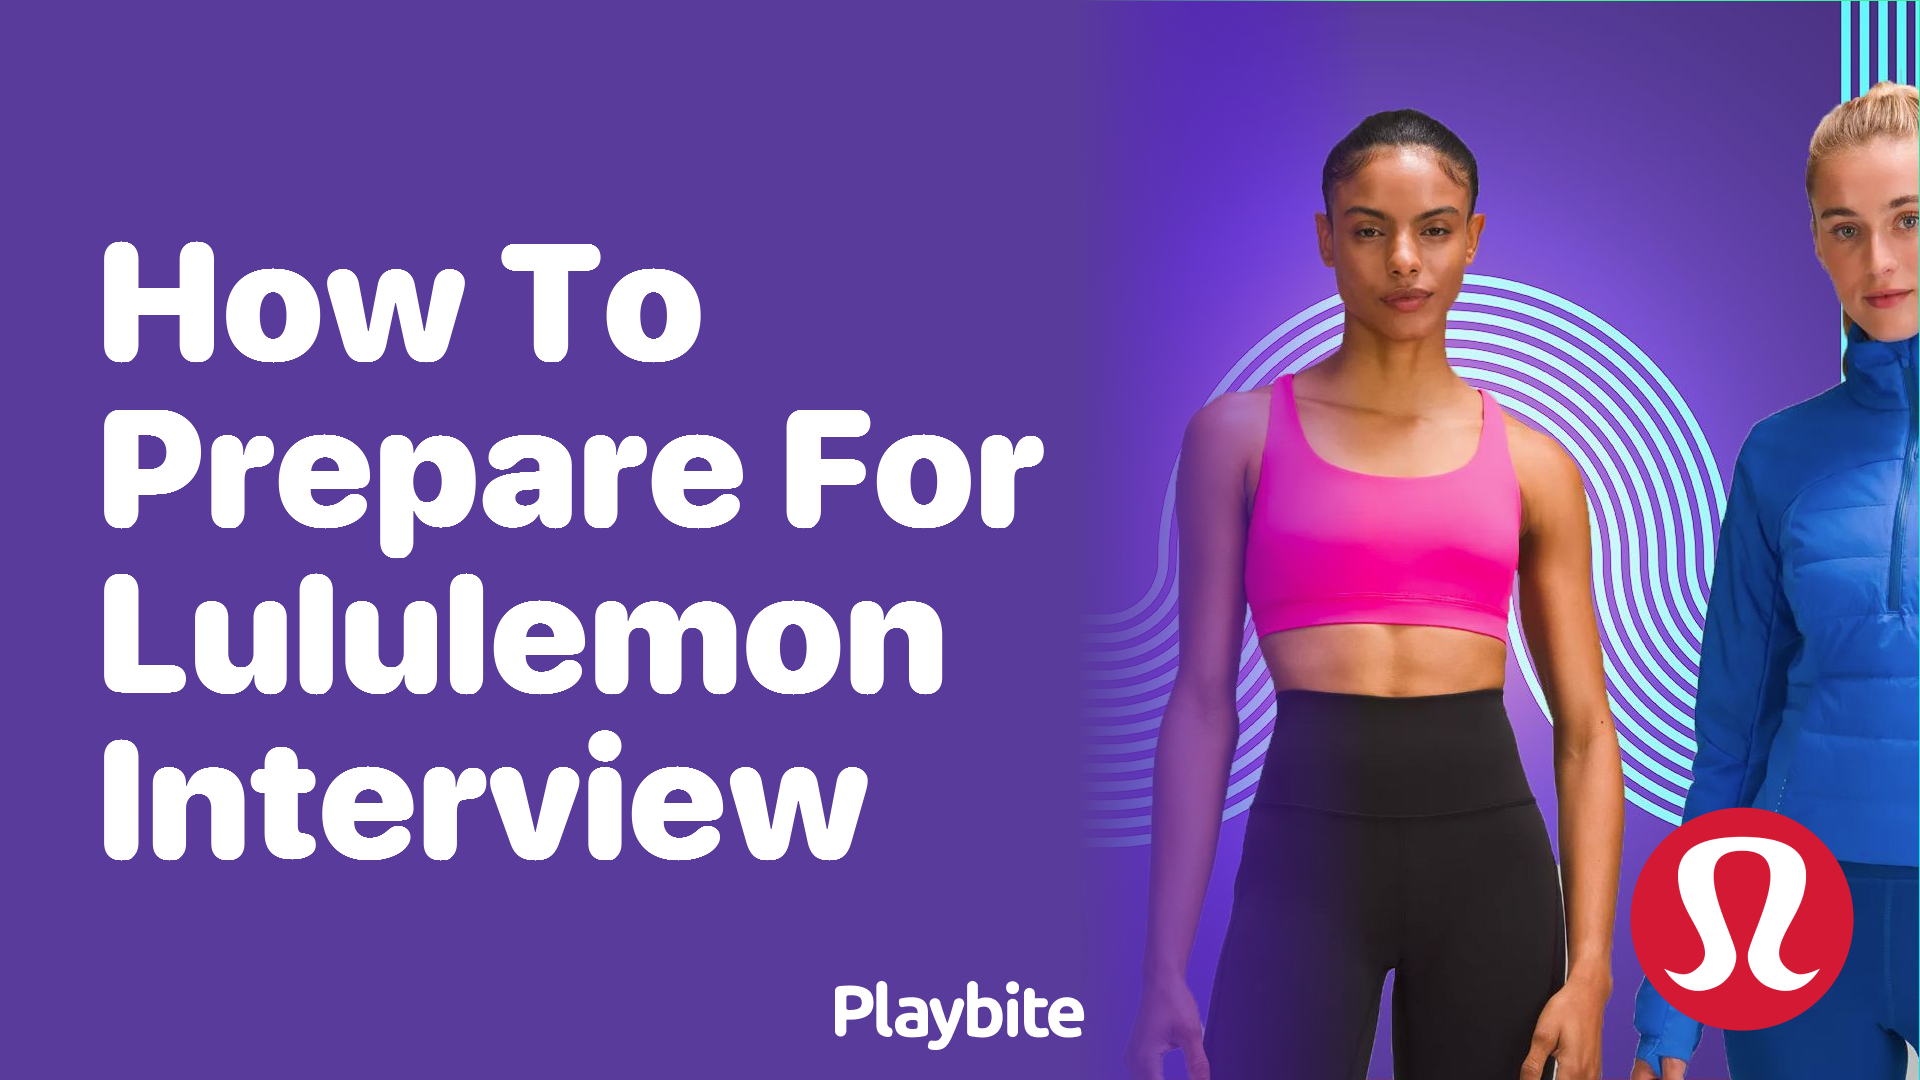 How to Prepare for a Lululemon Interview - Playbite